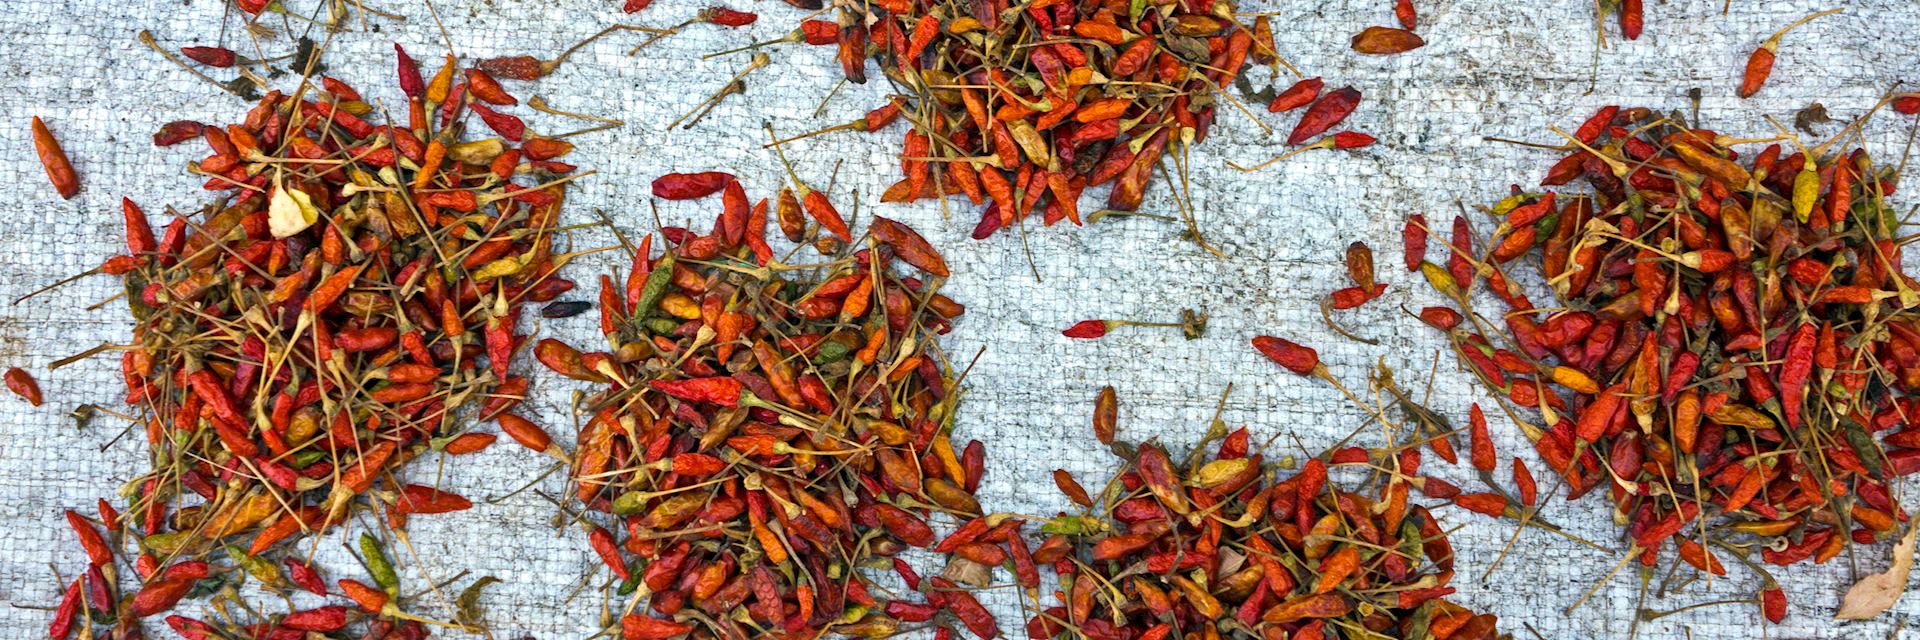 Chillies drying in a Mozambique market